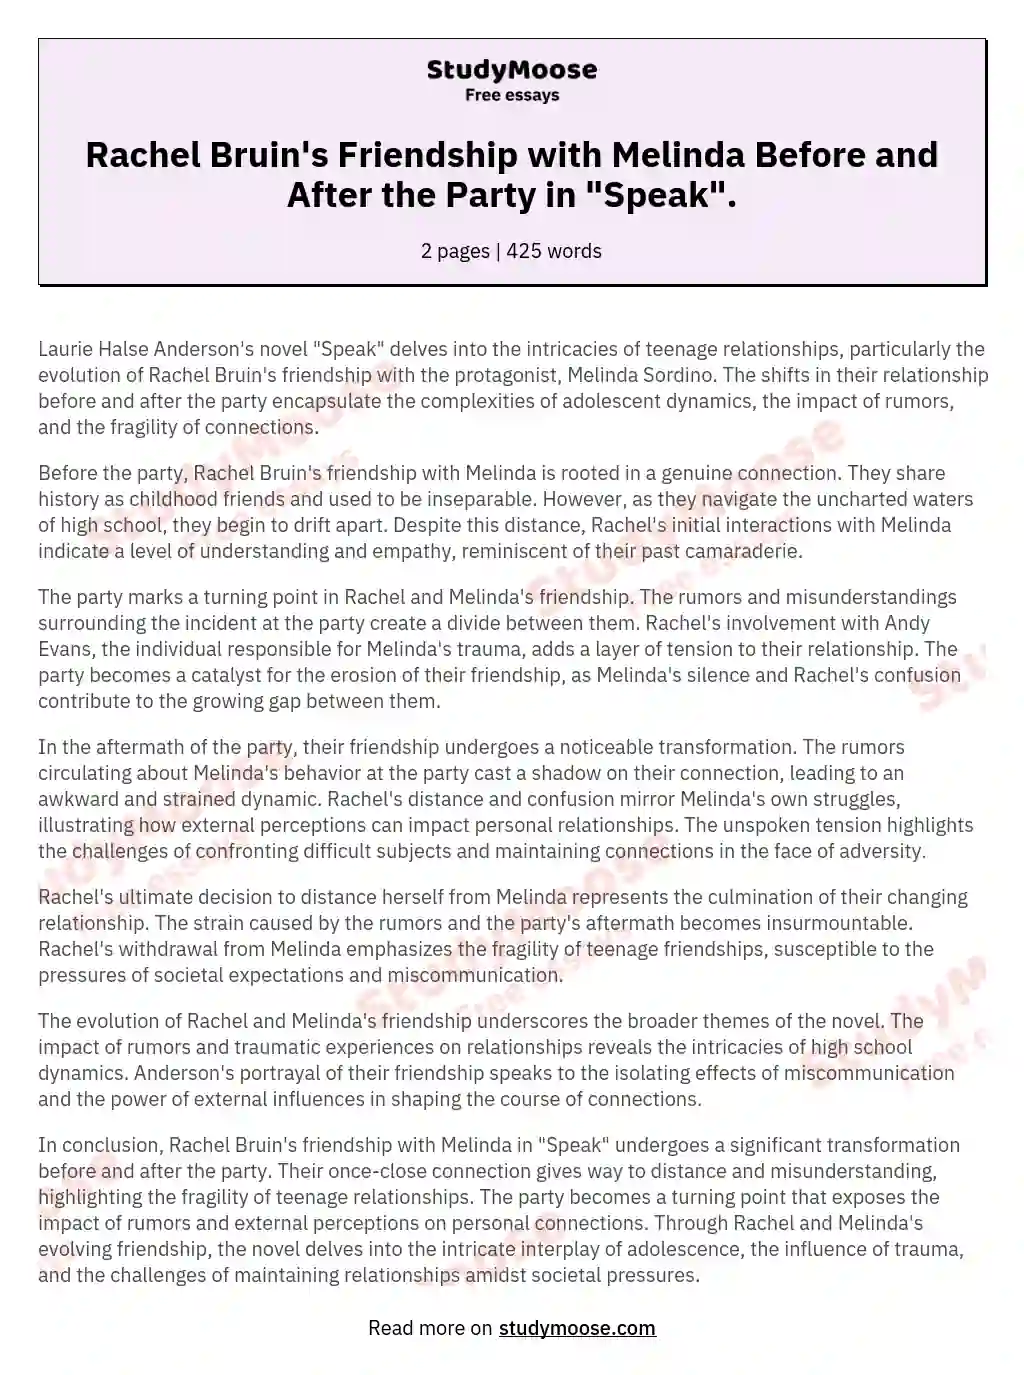 Rachel Bruin's Friendship with Melinda Before and After the Party in "Speak". essay